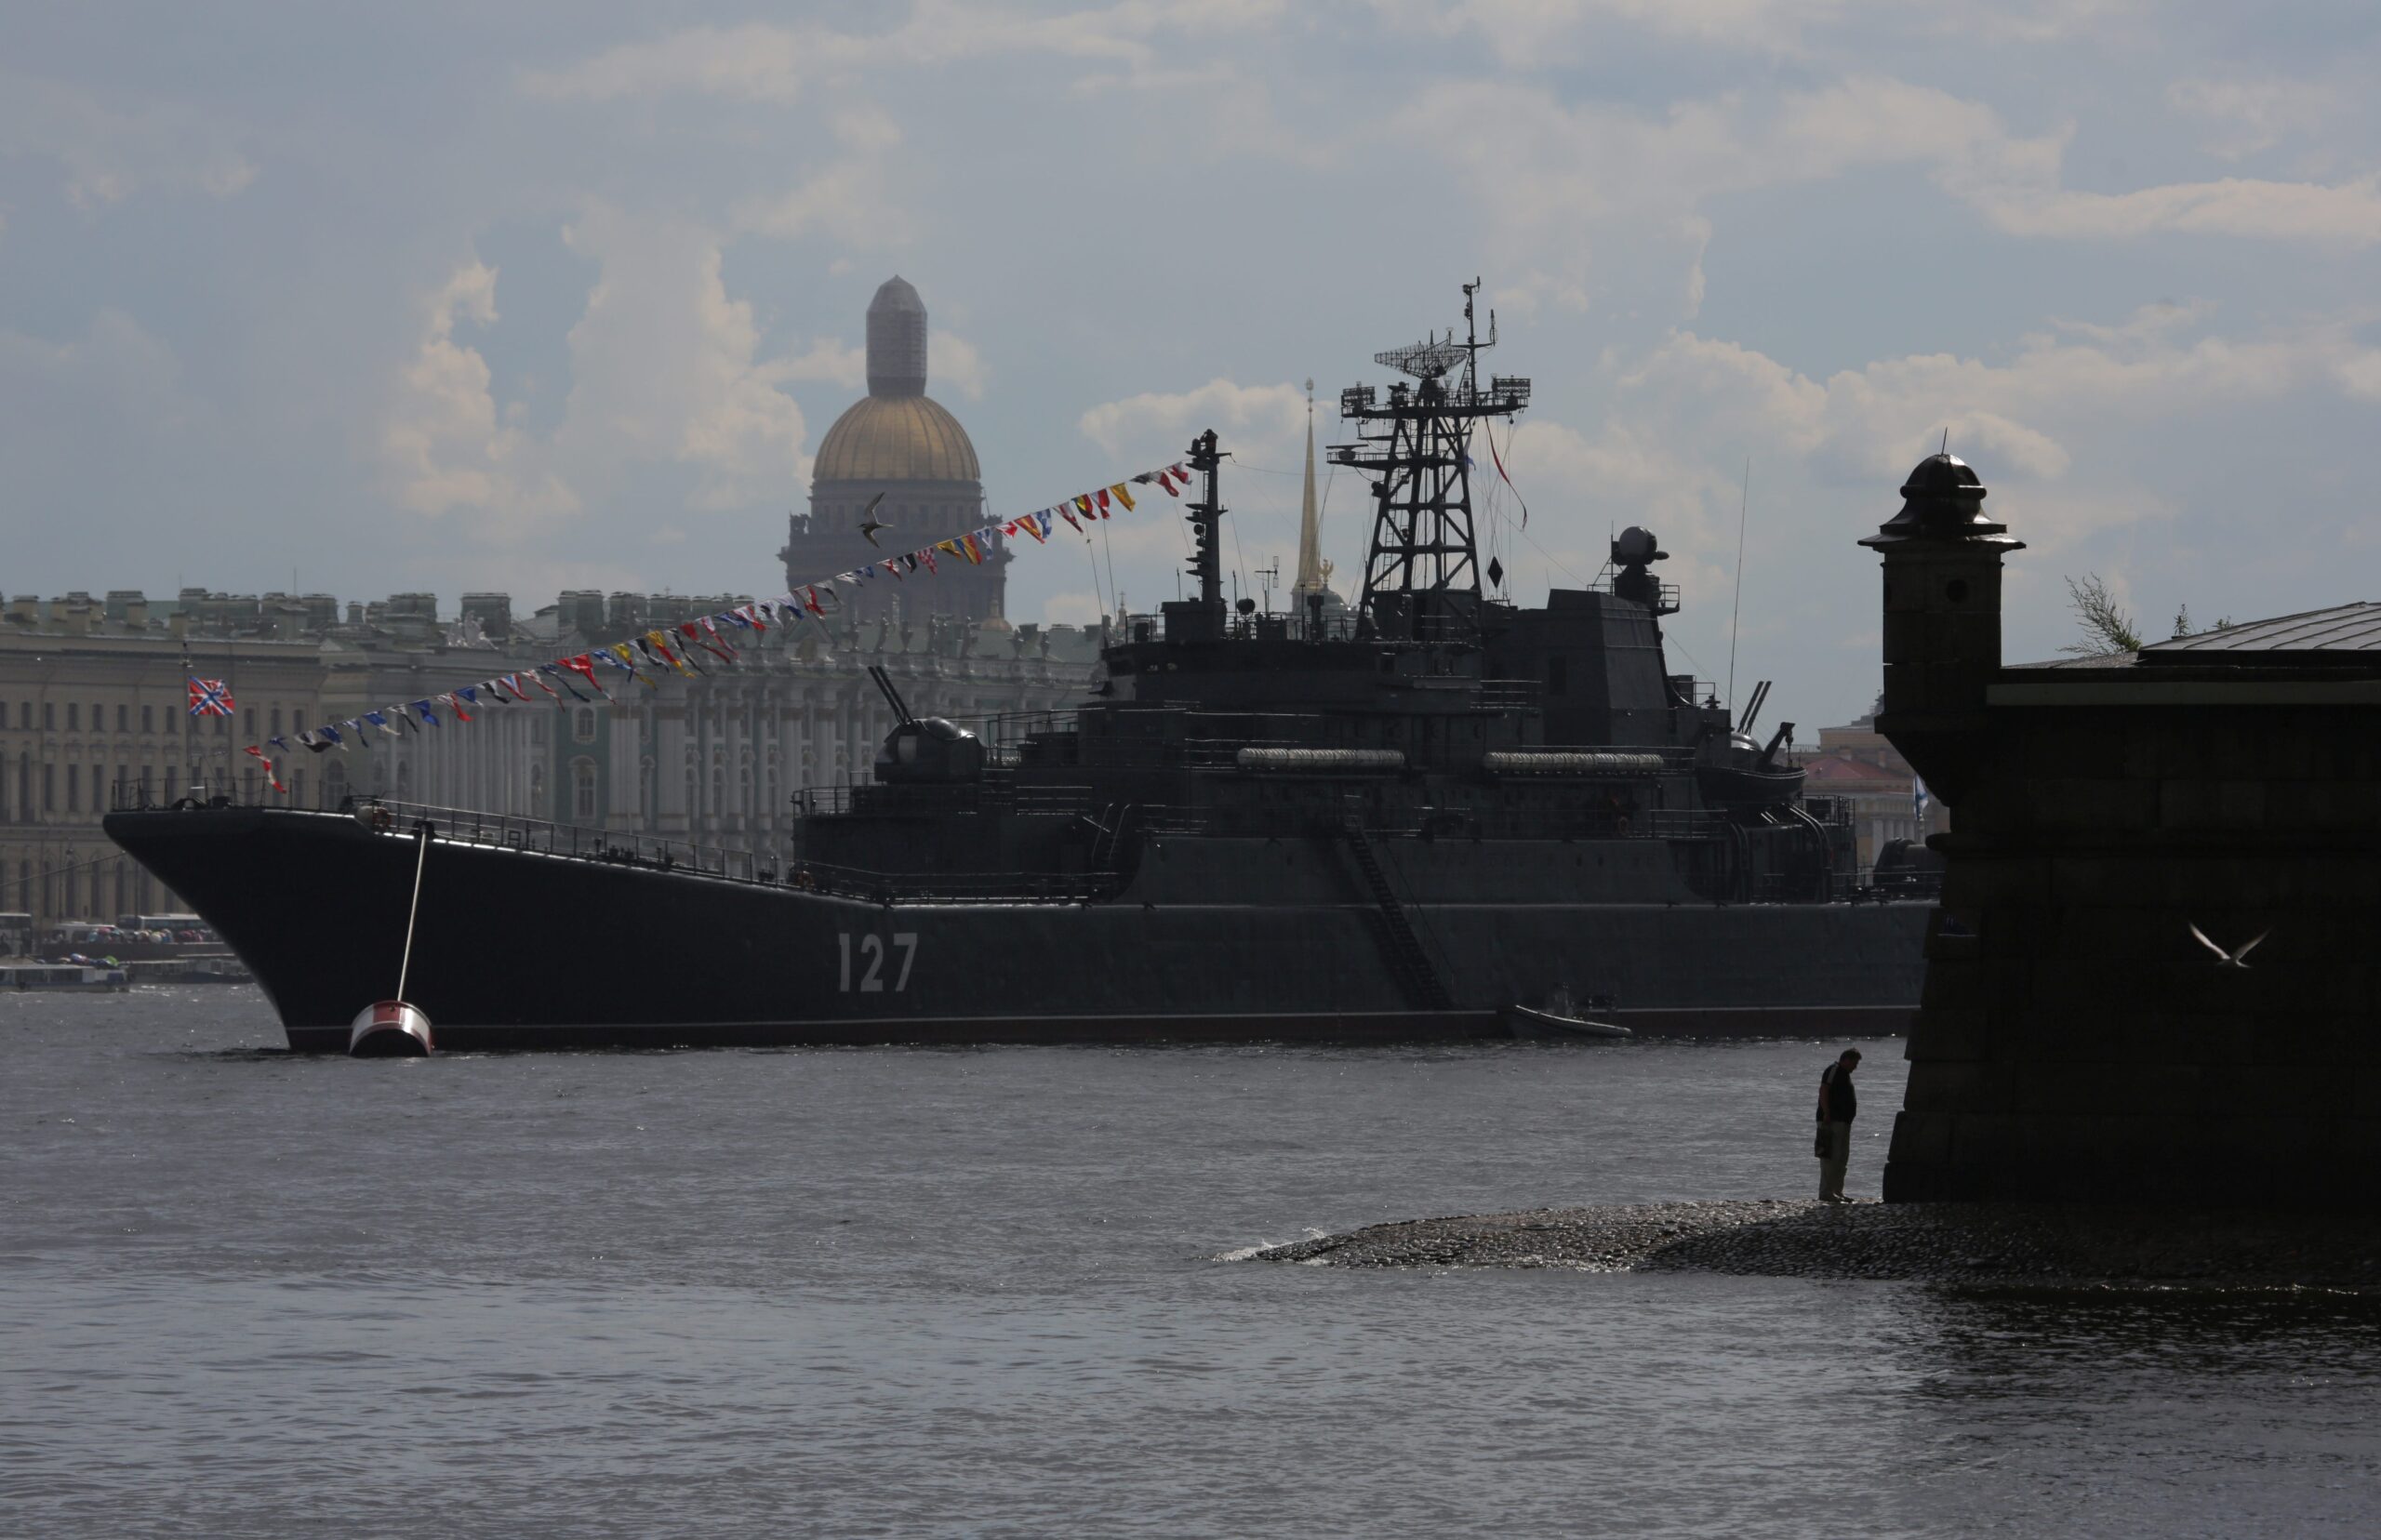 Russian Navy's large landing ship Minsk is seen in the Neva river, with Saint Isaac's Cathedral and Hermitage Museum seen in the background, in St. Petersburg, Russia